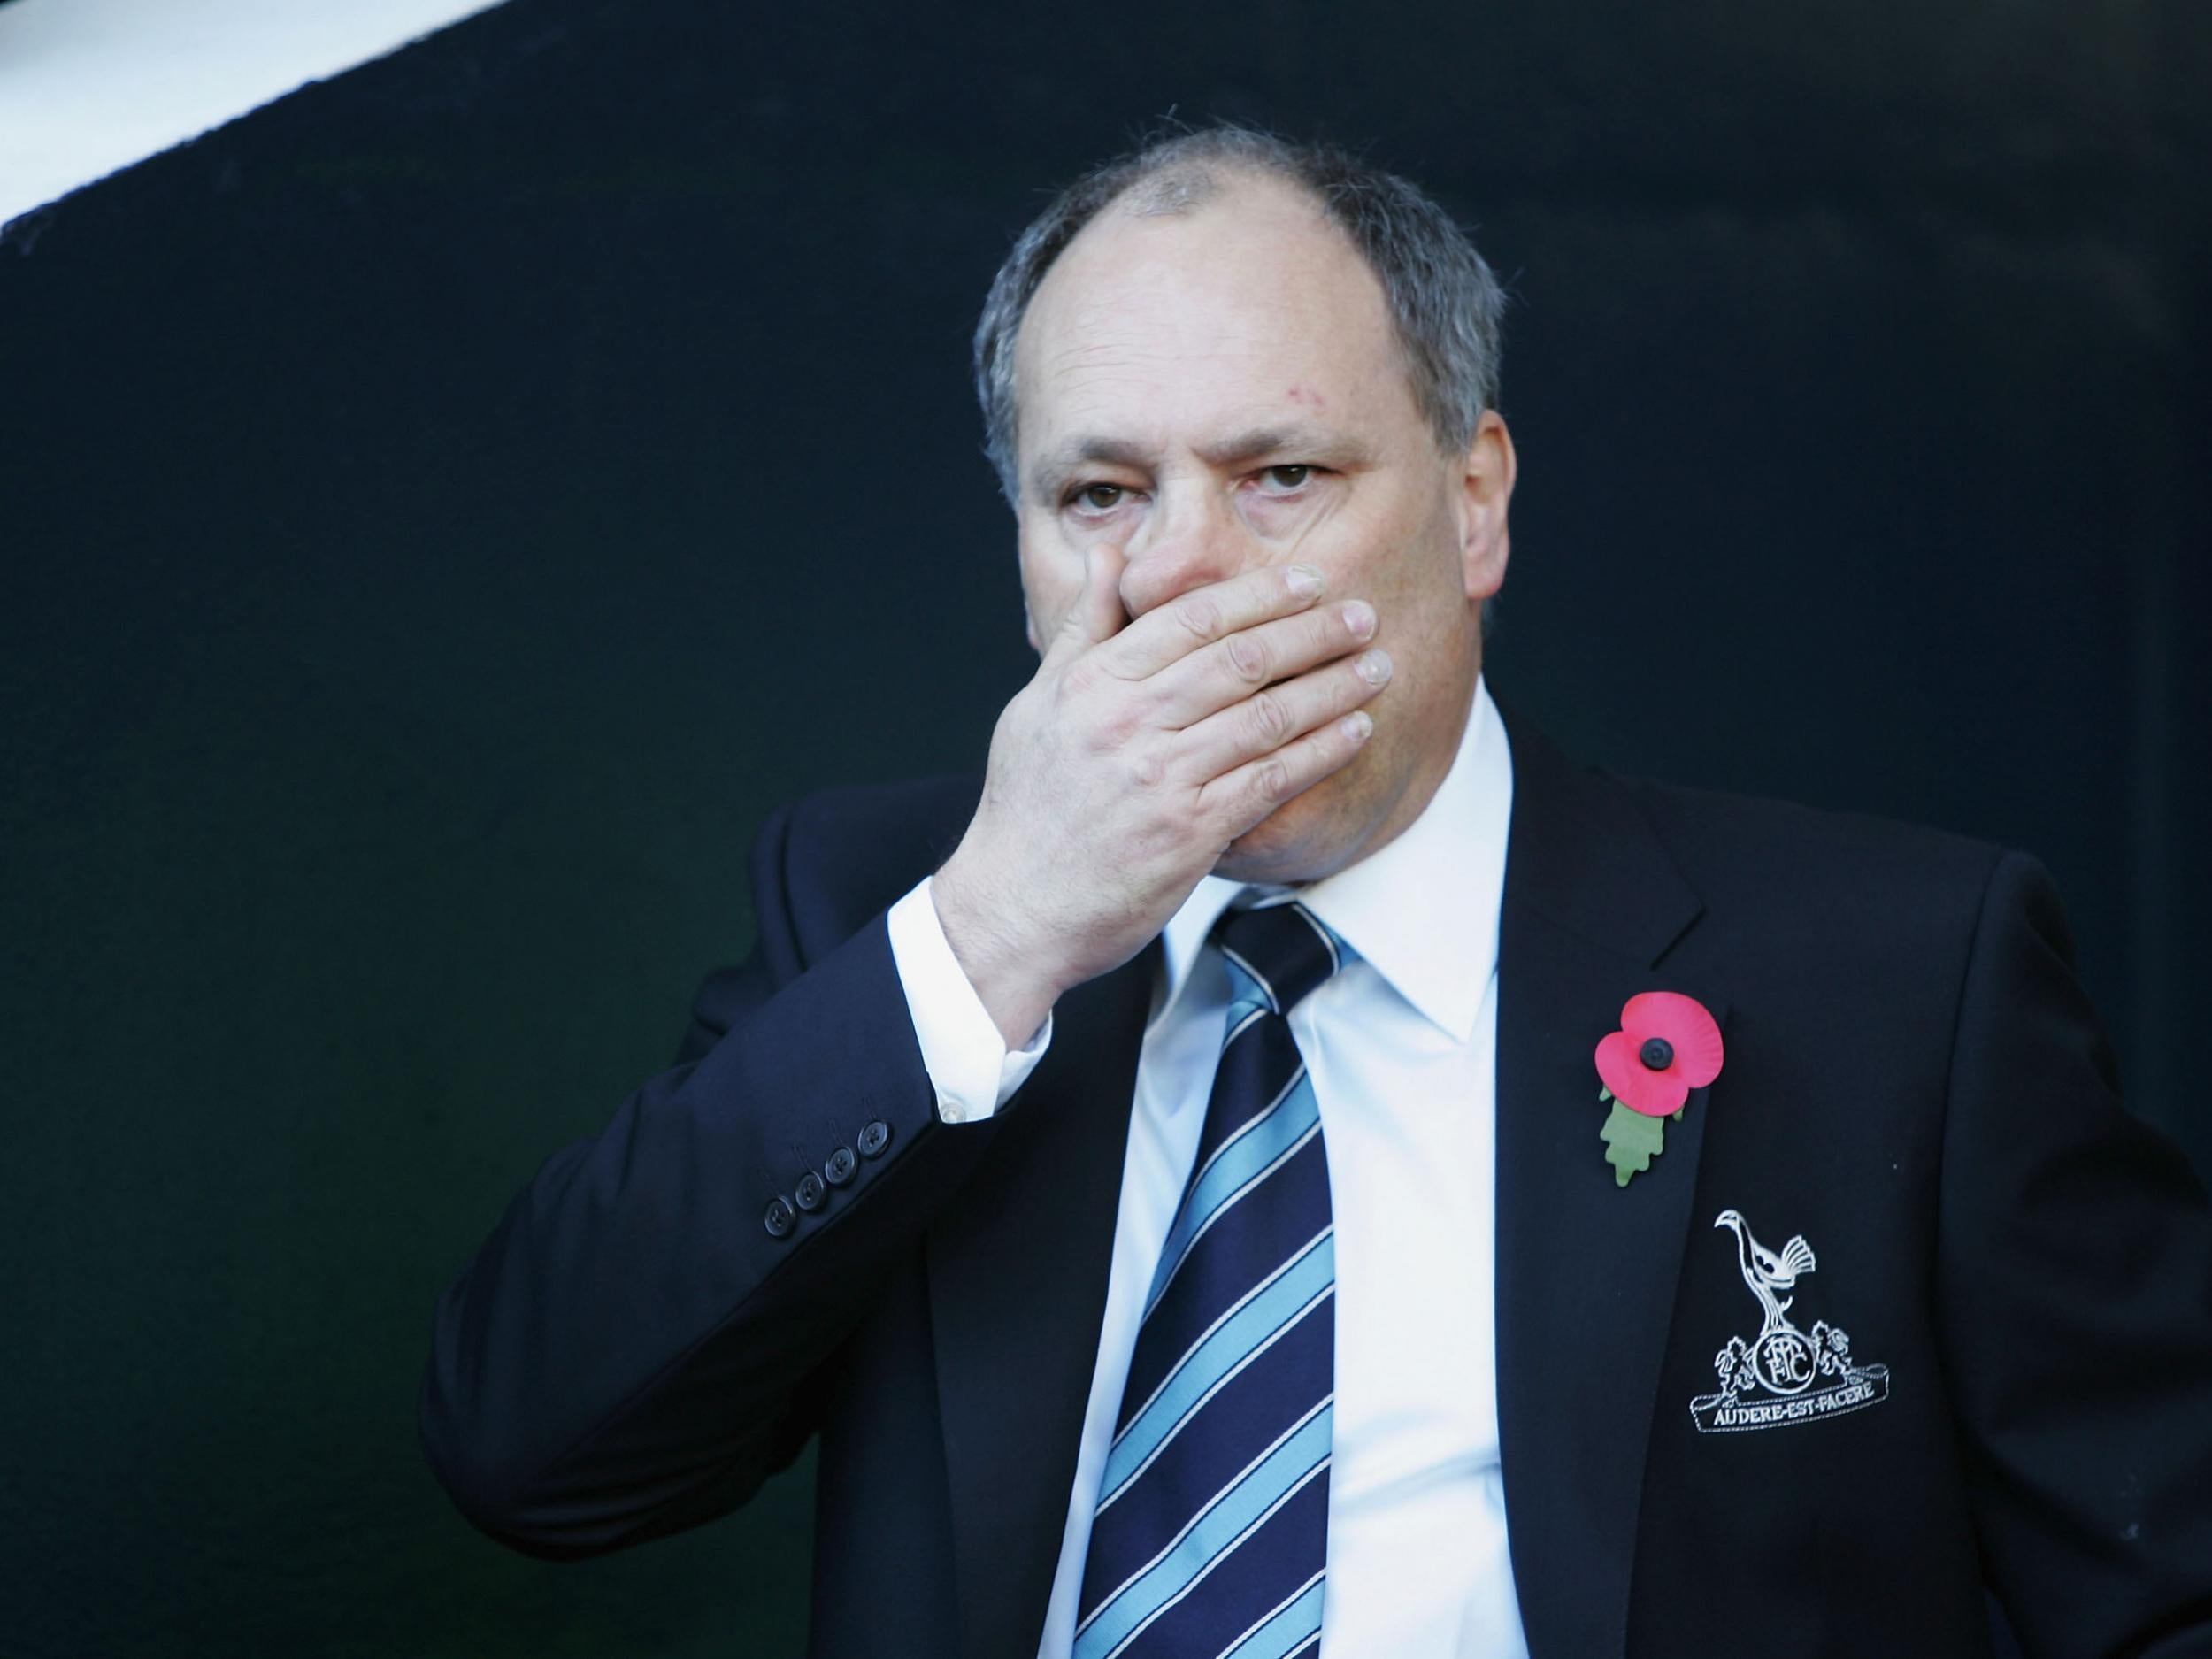 Martin Jol only narrowly lost his first game as Spurs manager